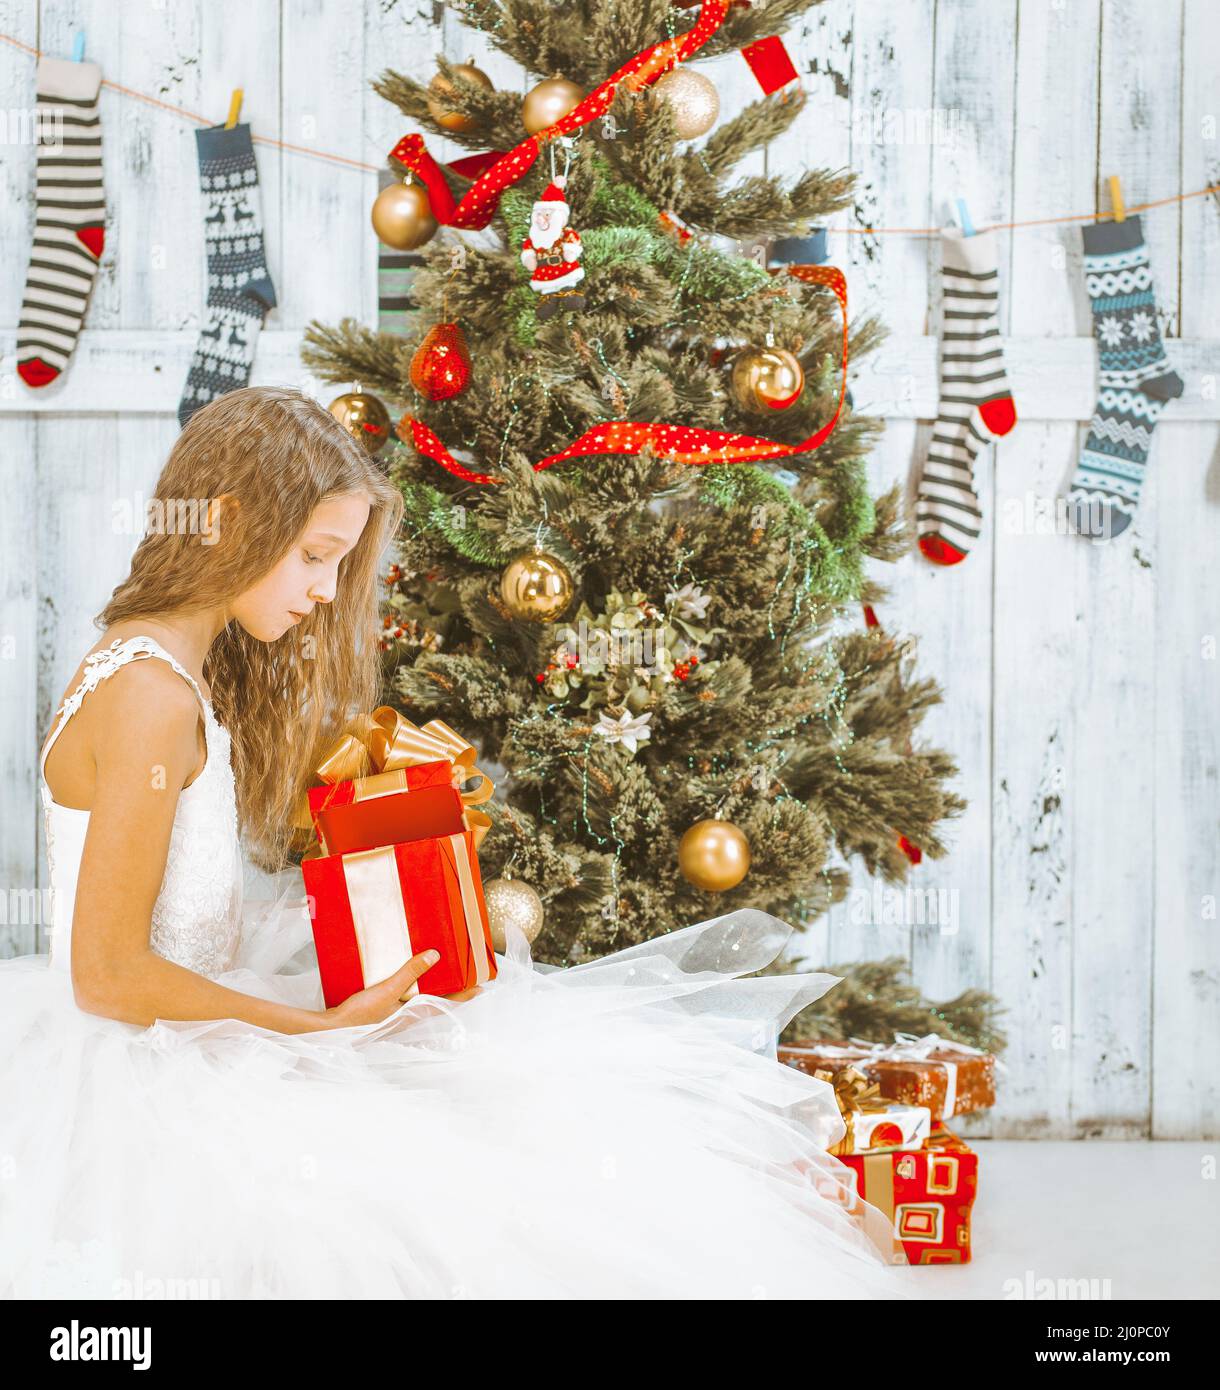 Teenage Girl with Long Hair in a White Tutu Dress Sits under a Christmas Tree and Unpacks her Present. Christmas Morning Stock Photo